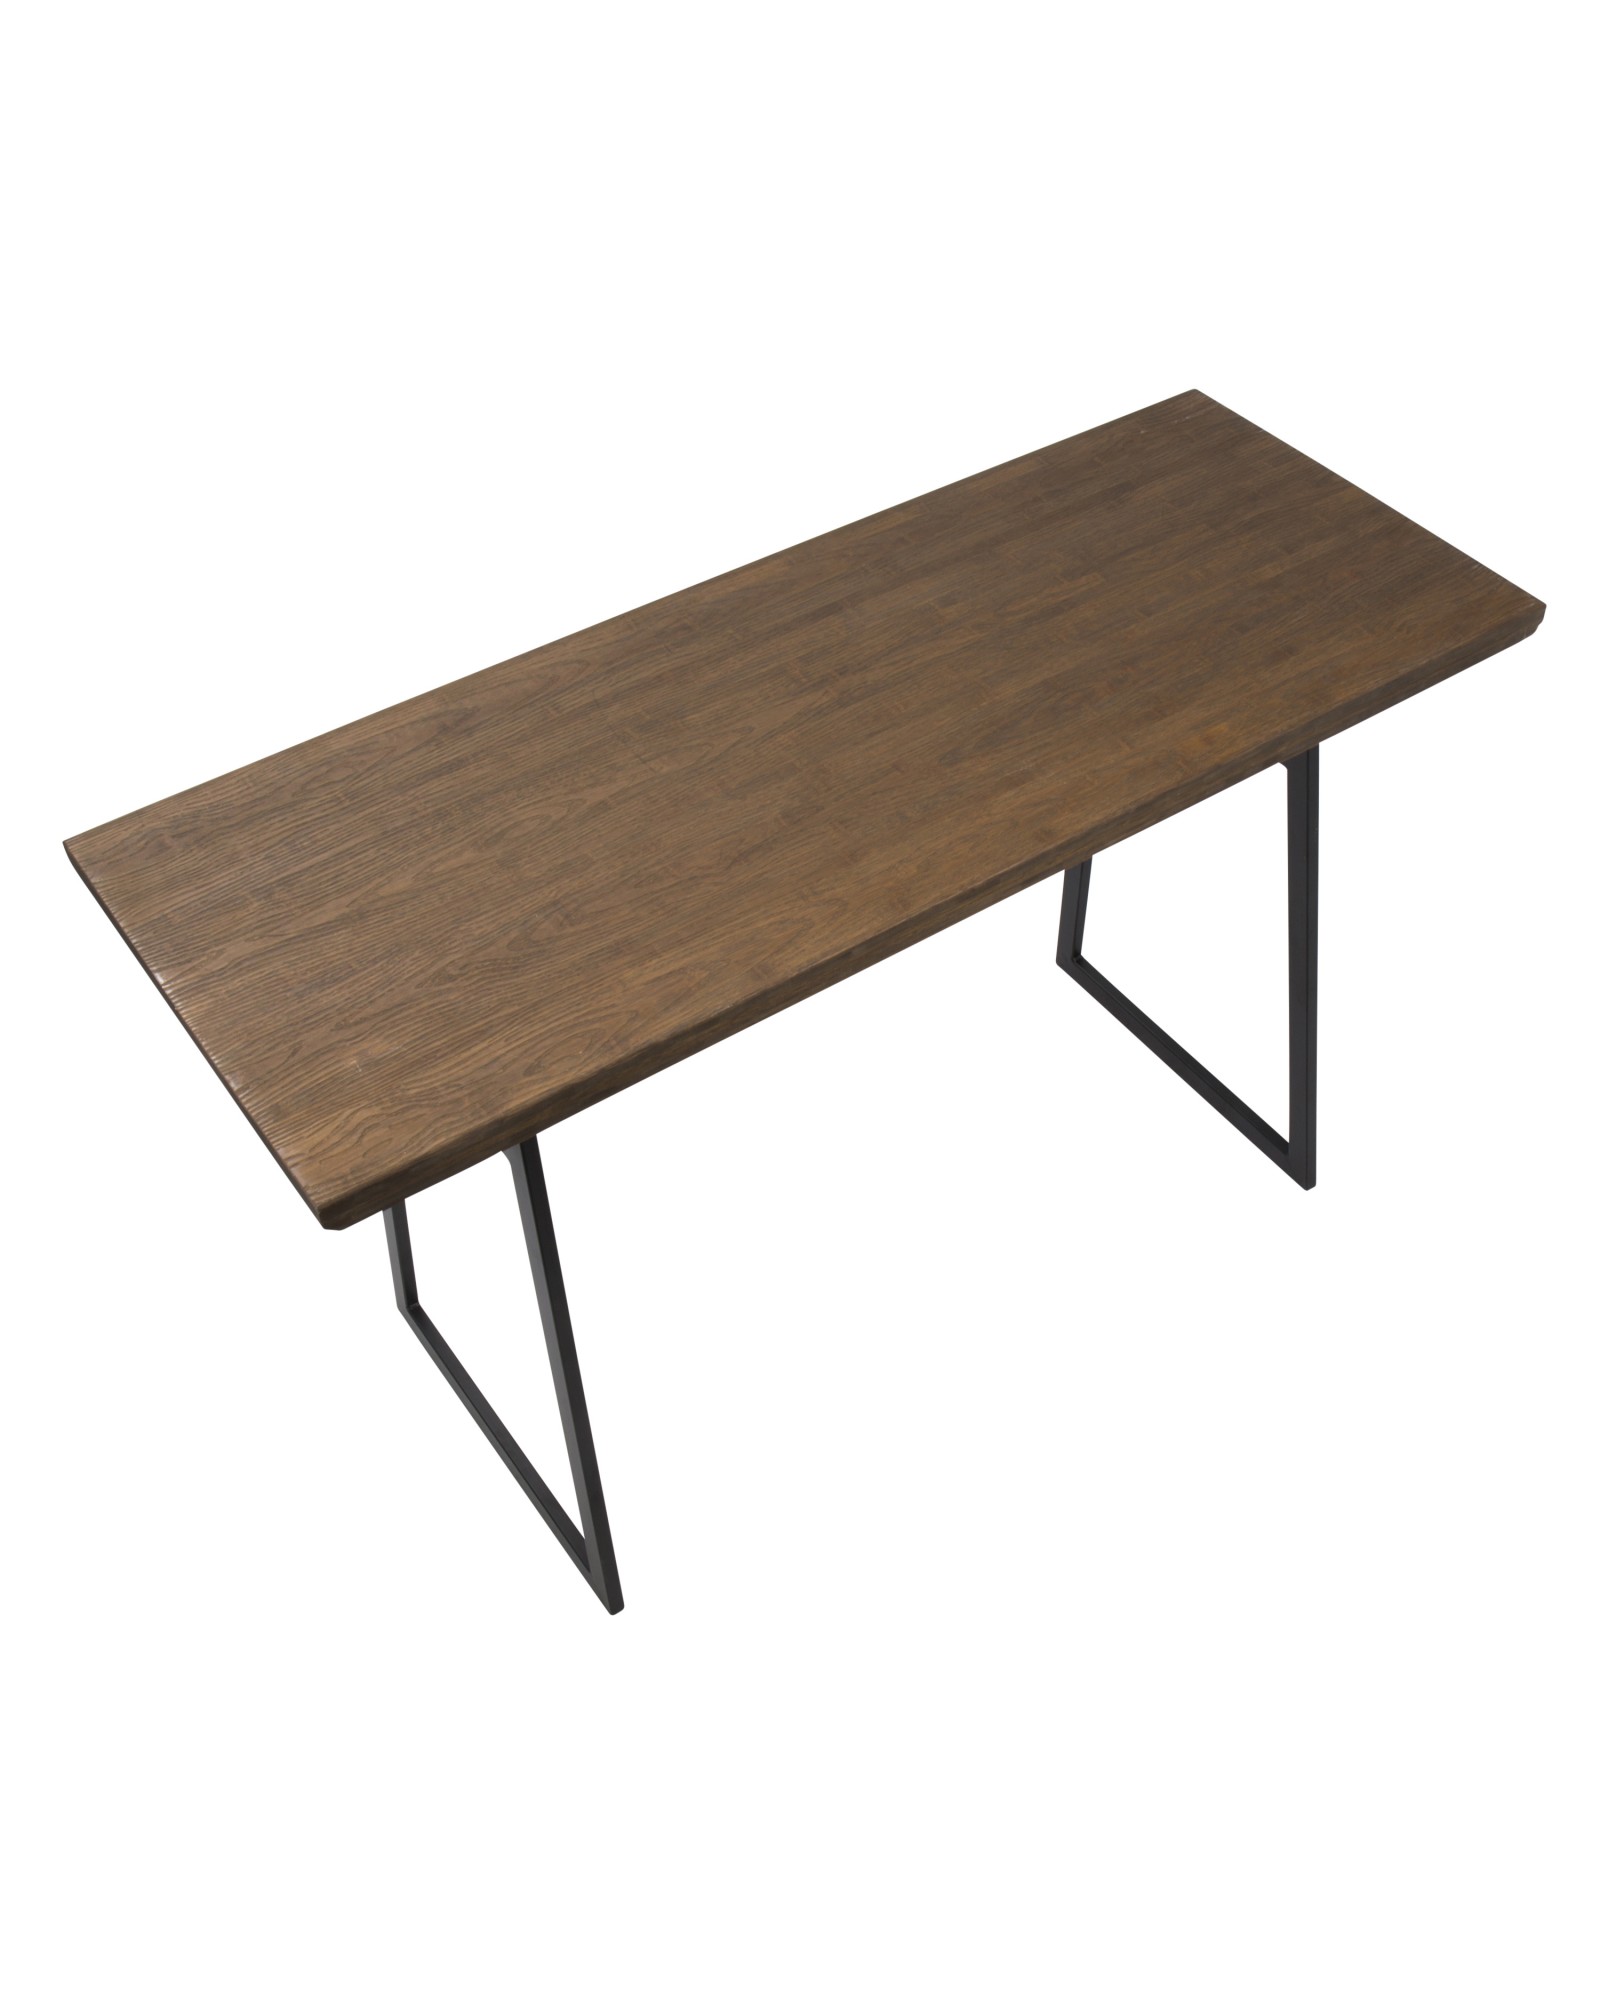 Geo Industrial Counter Table in Black with Brown Wood Top